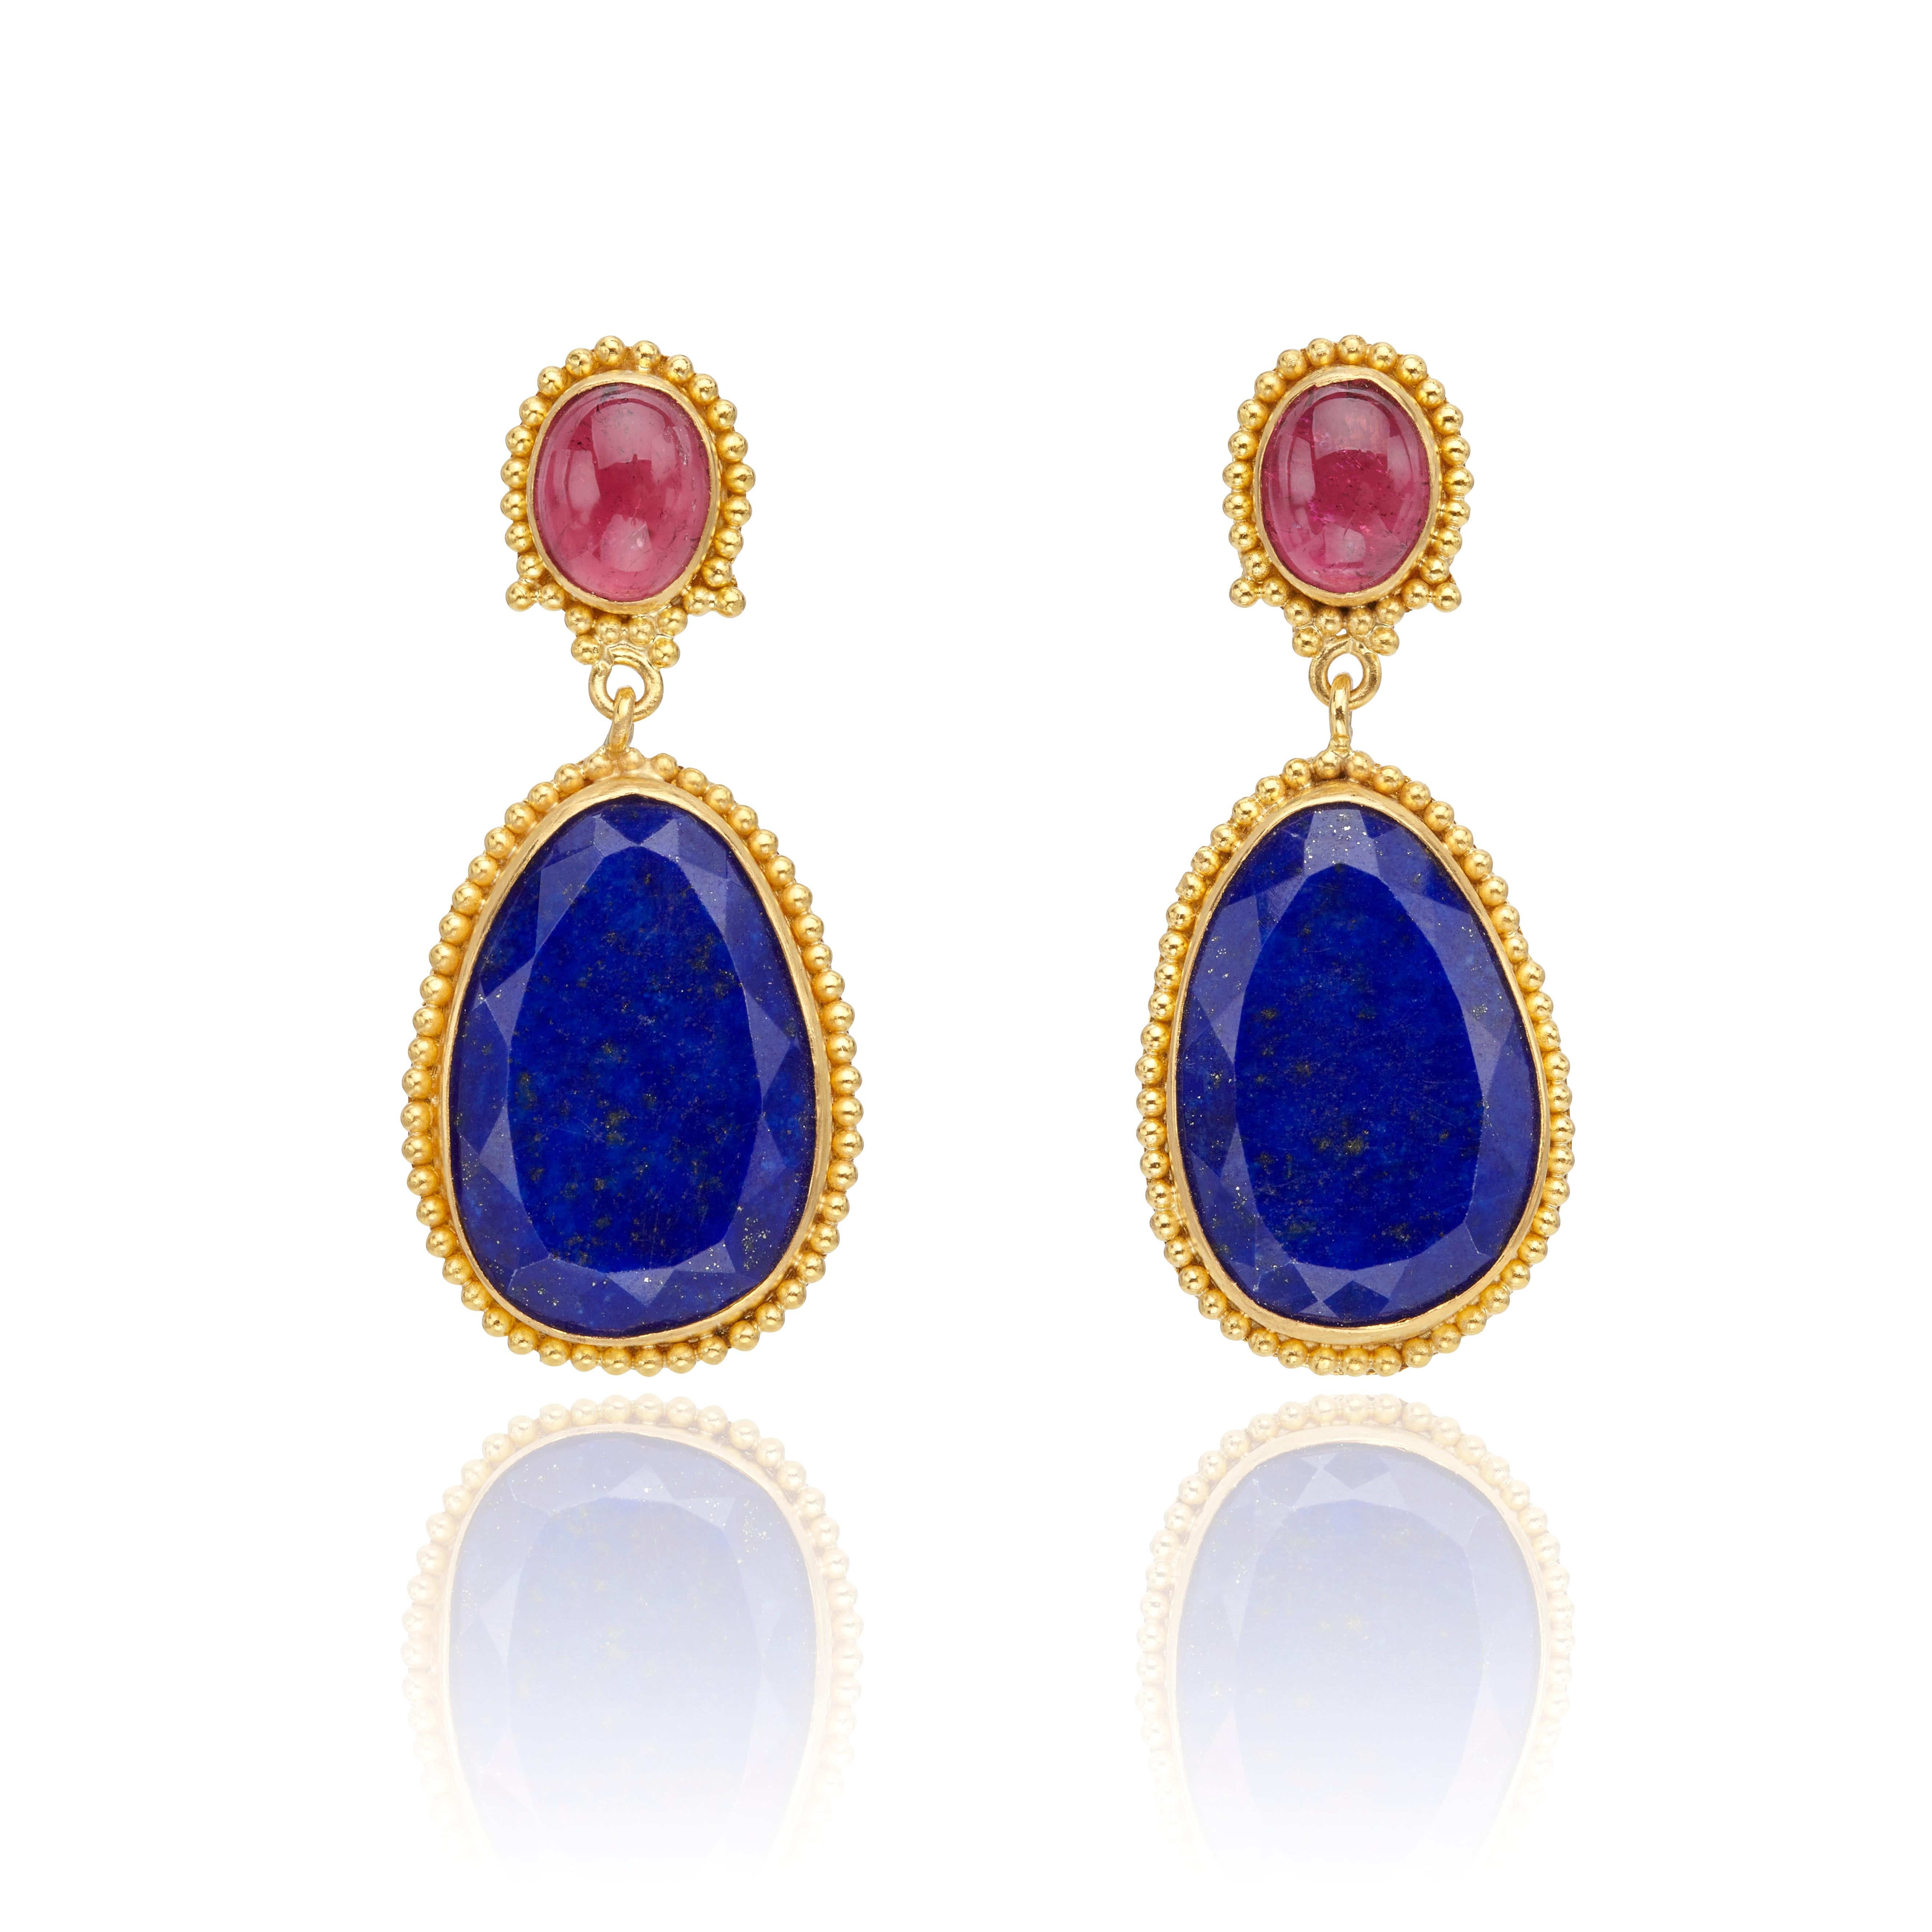 Gold Beaded Earrings, in 22Kt yellow gold, Handcrafted using traditional techniques, with Blue Lapis Lazuli and Red Tourmaline.
When the past meets the present the result is an exceptional pair of earrings reminding something of the 